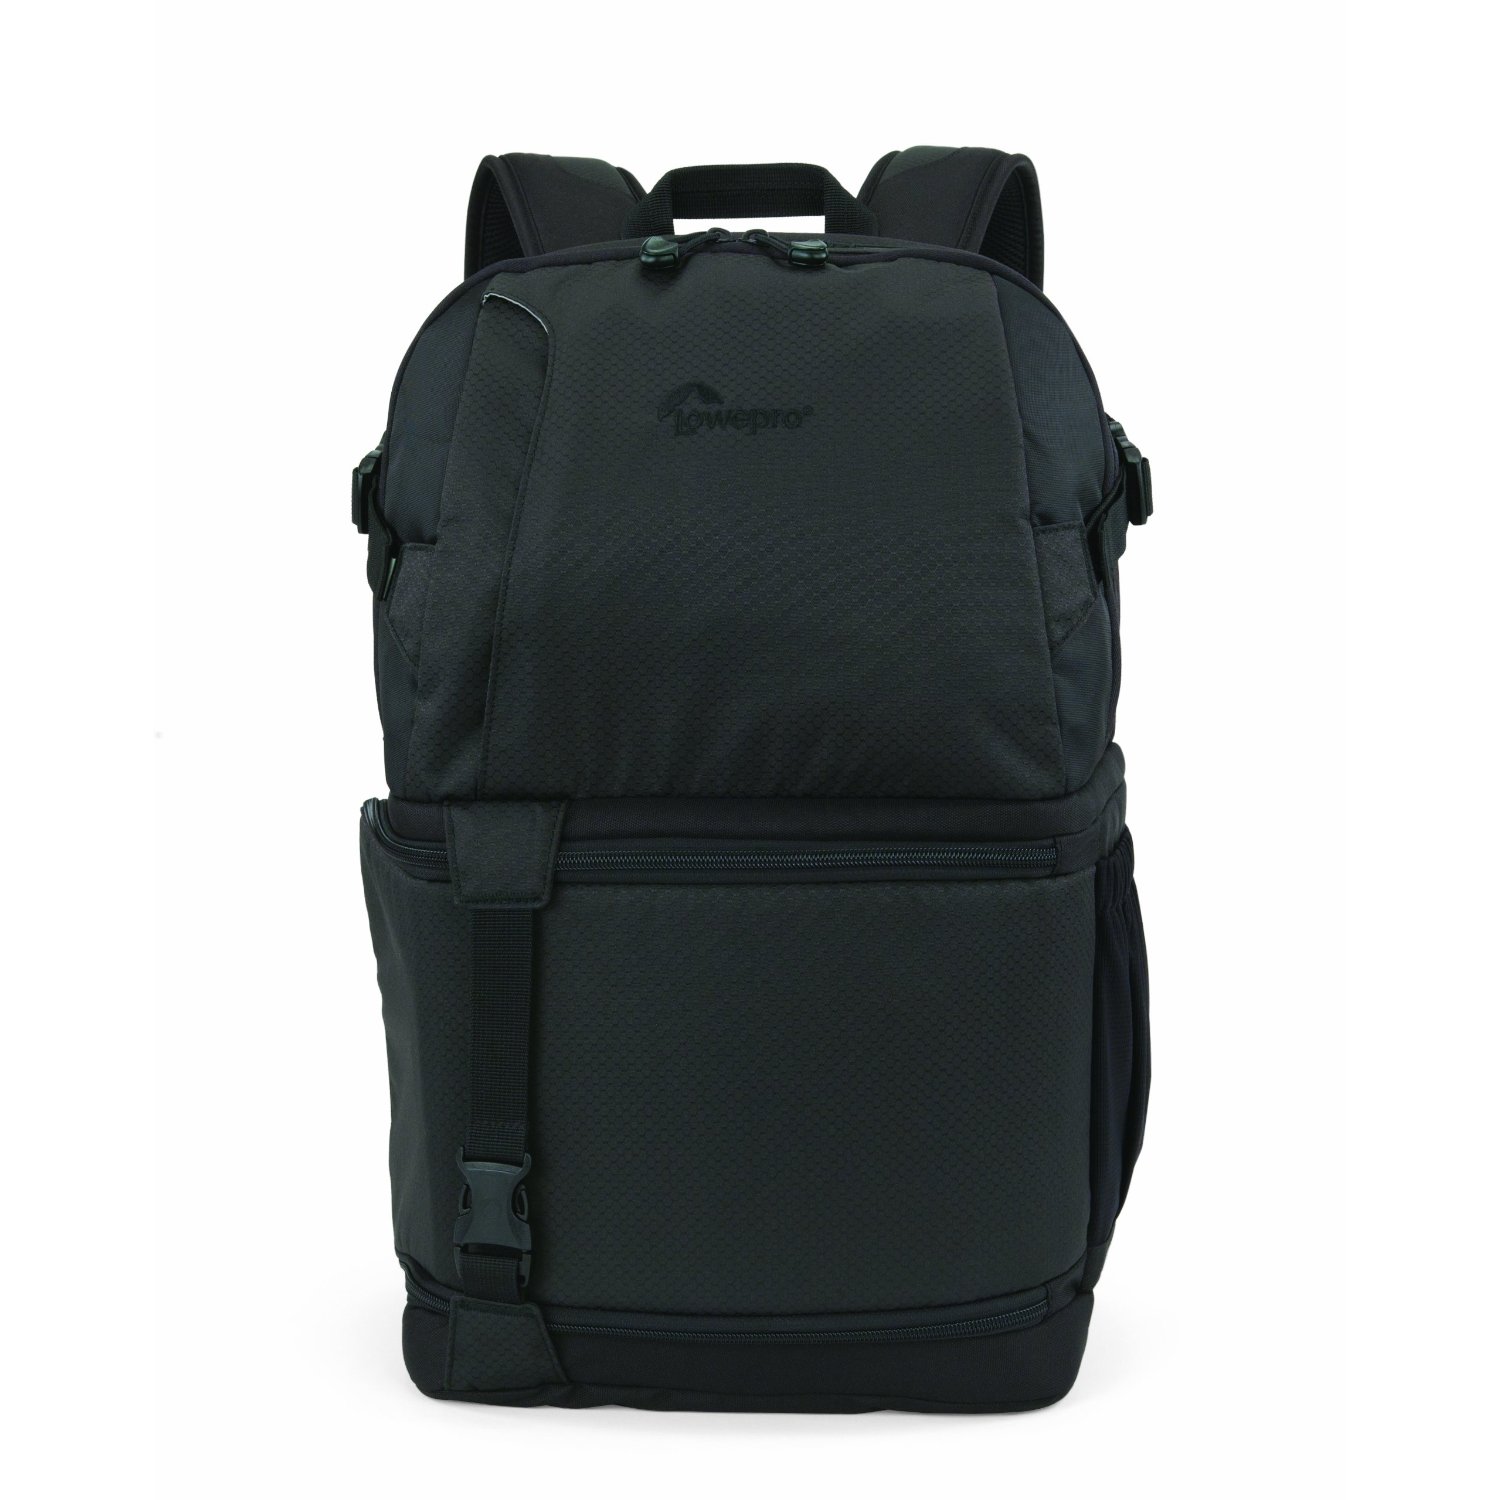 Lowepro 350 AW DSLR Video Fastpack [REVIEW]